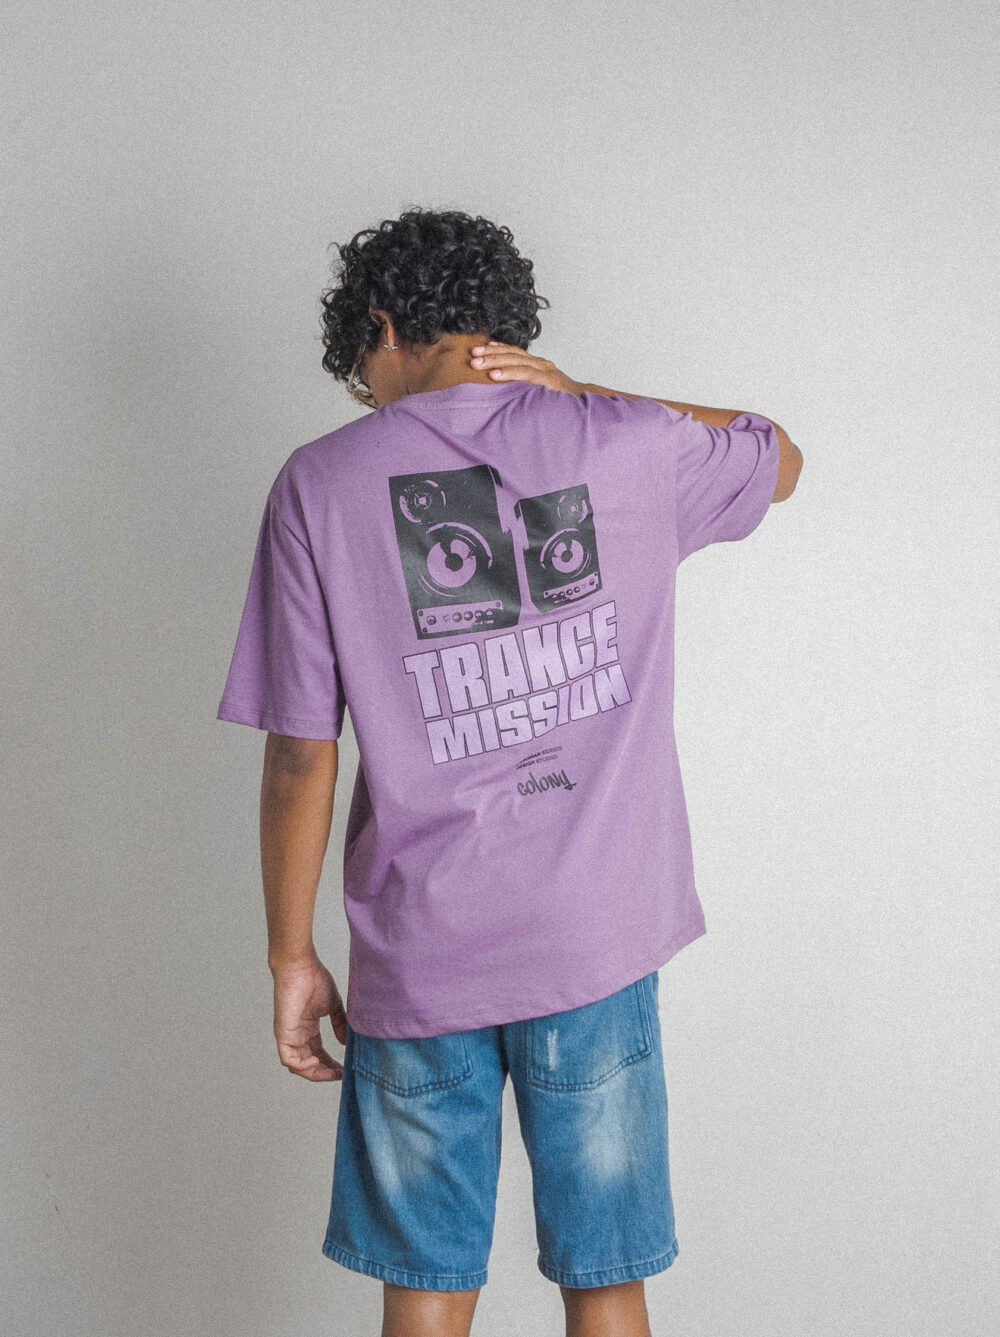 Oversized Graphic Tee Trance Mission Purple Back